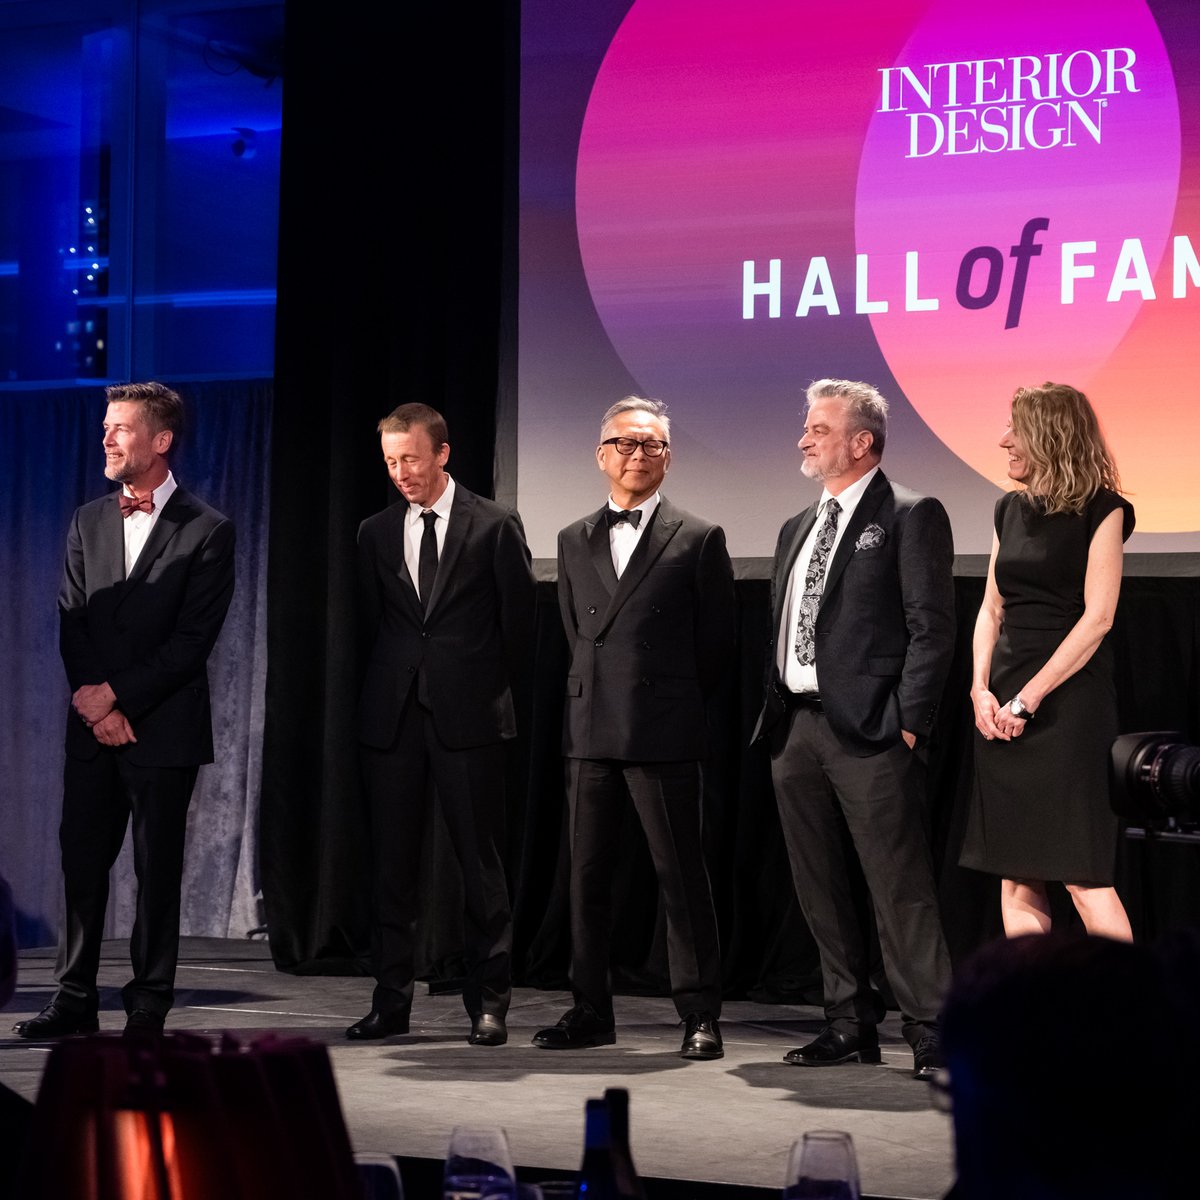 Attendees at Interior Design Hall of Fame Gala event